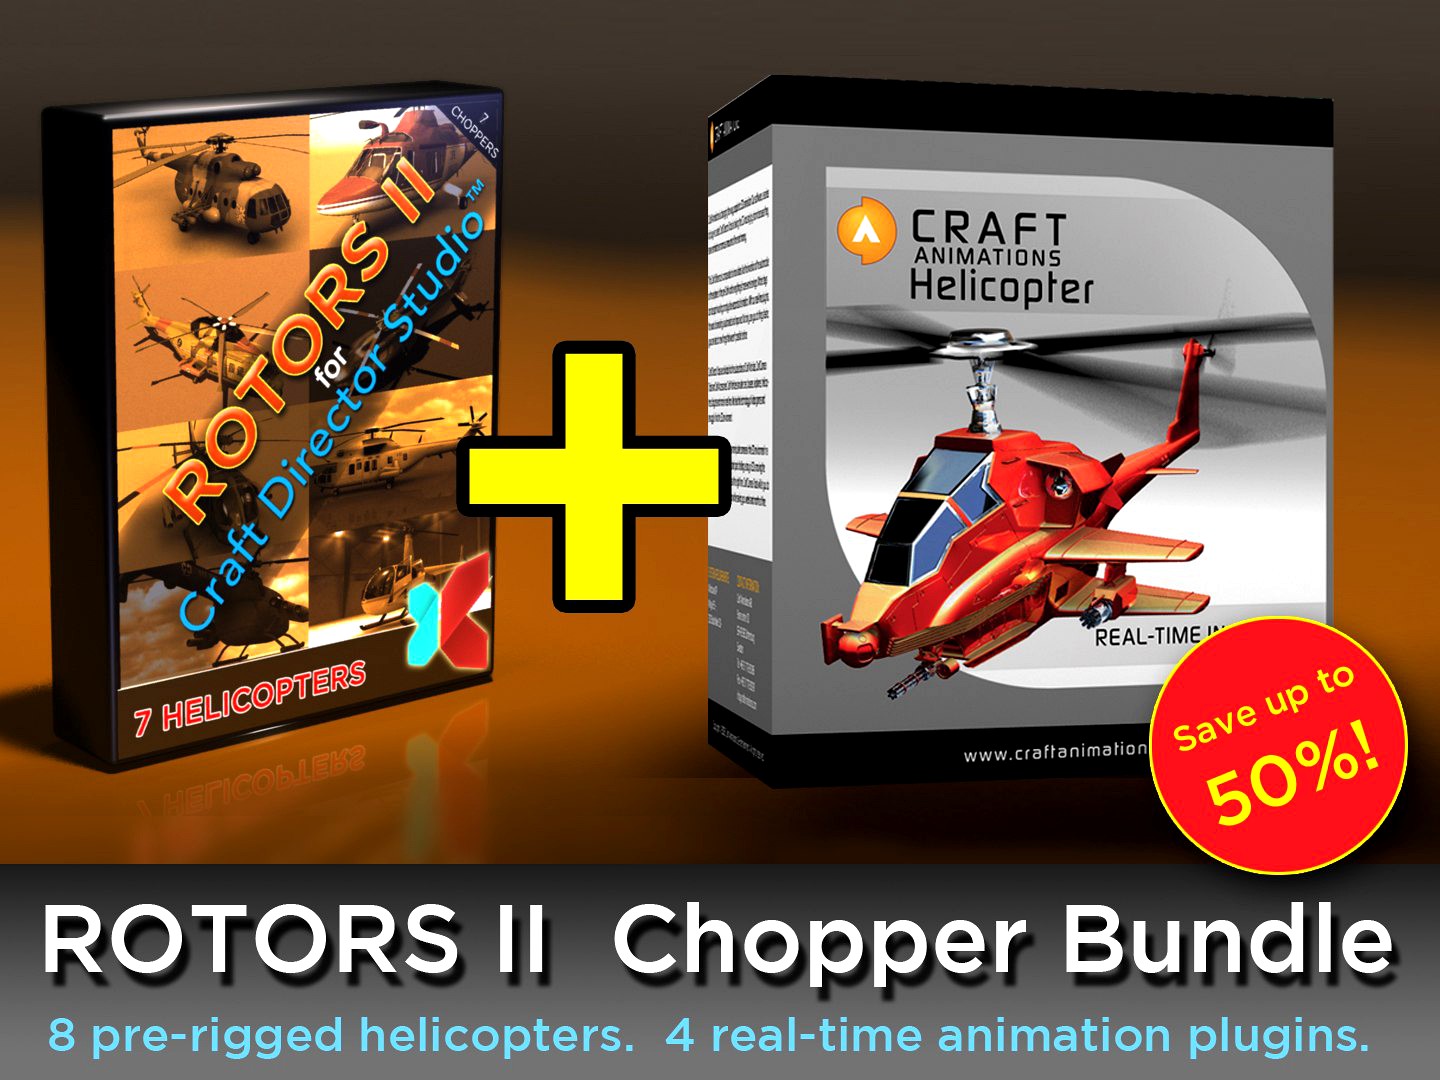 Rotors II - 7 Pre-Rigged Helicopters for Craft Director Studio and 1 Premium Plugin